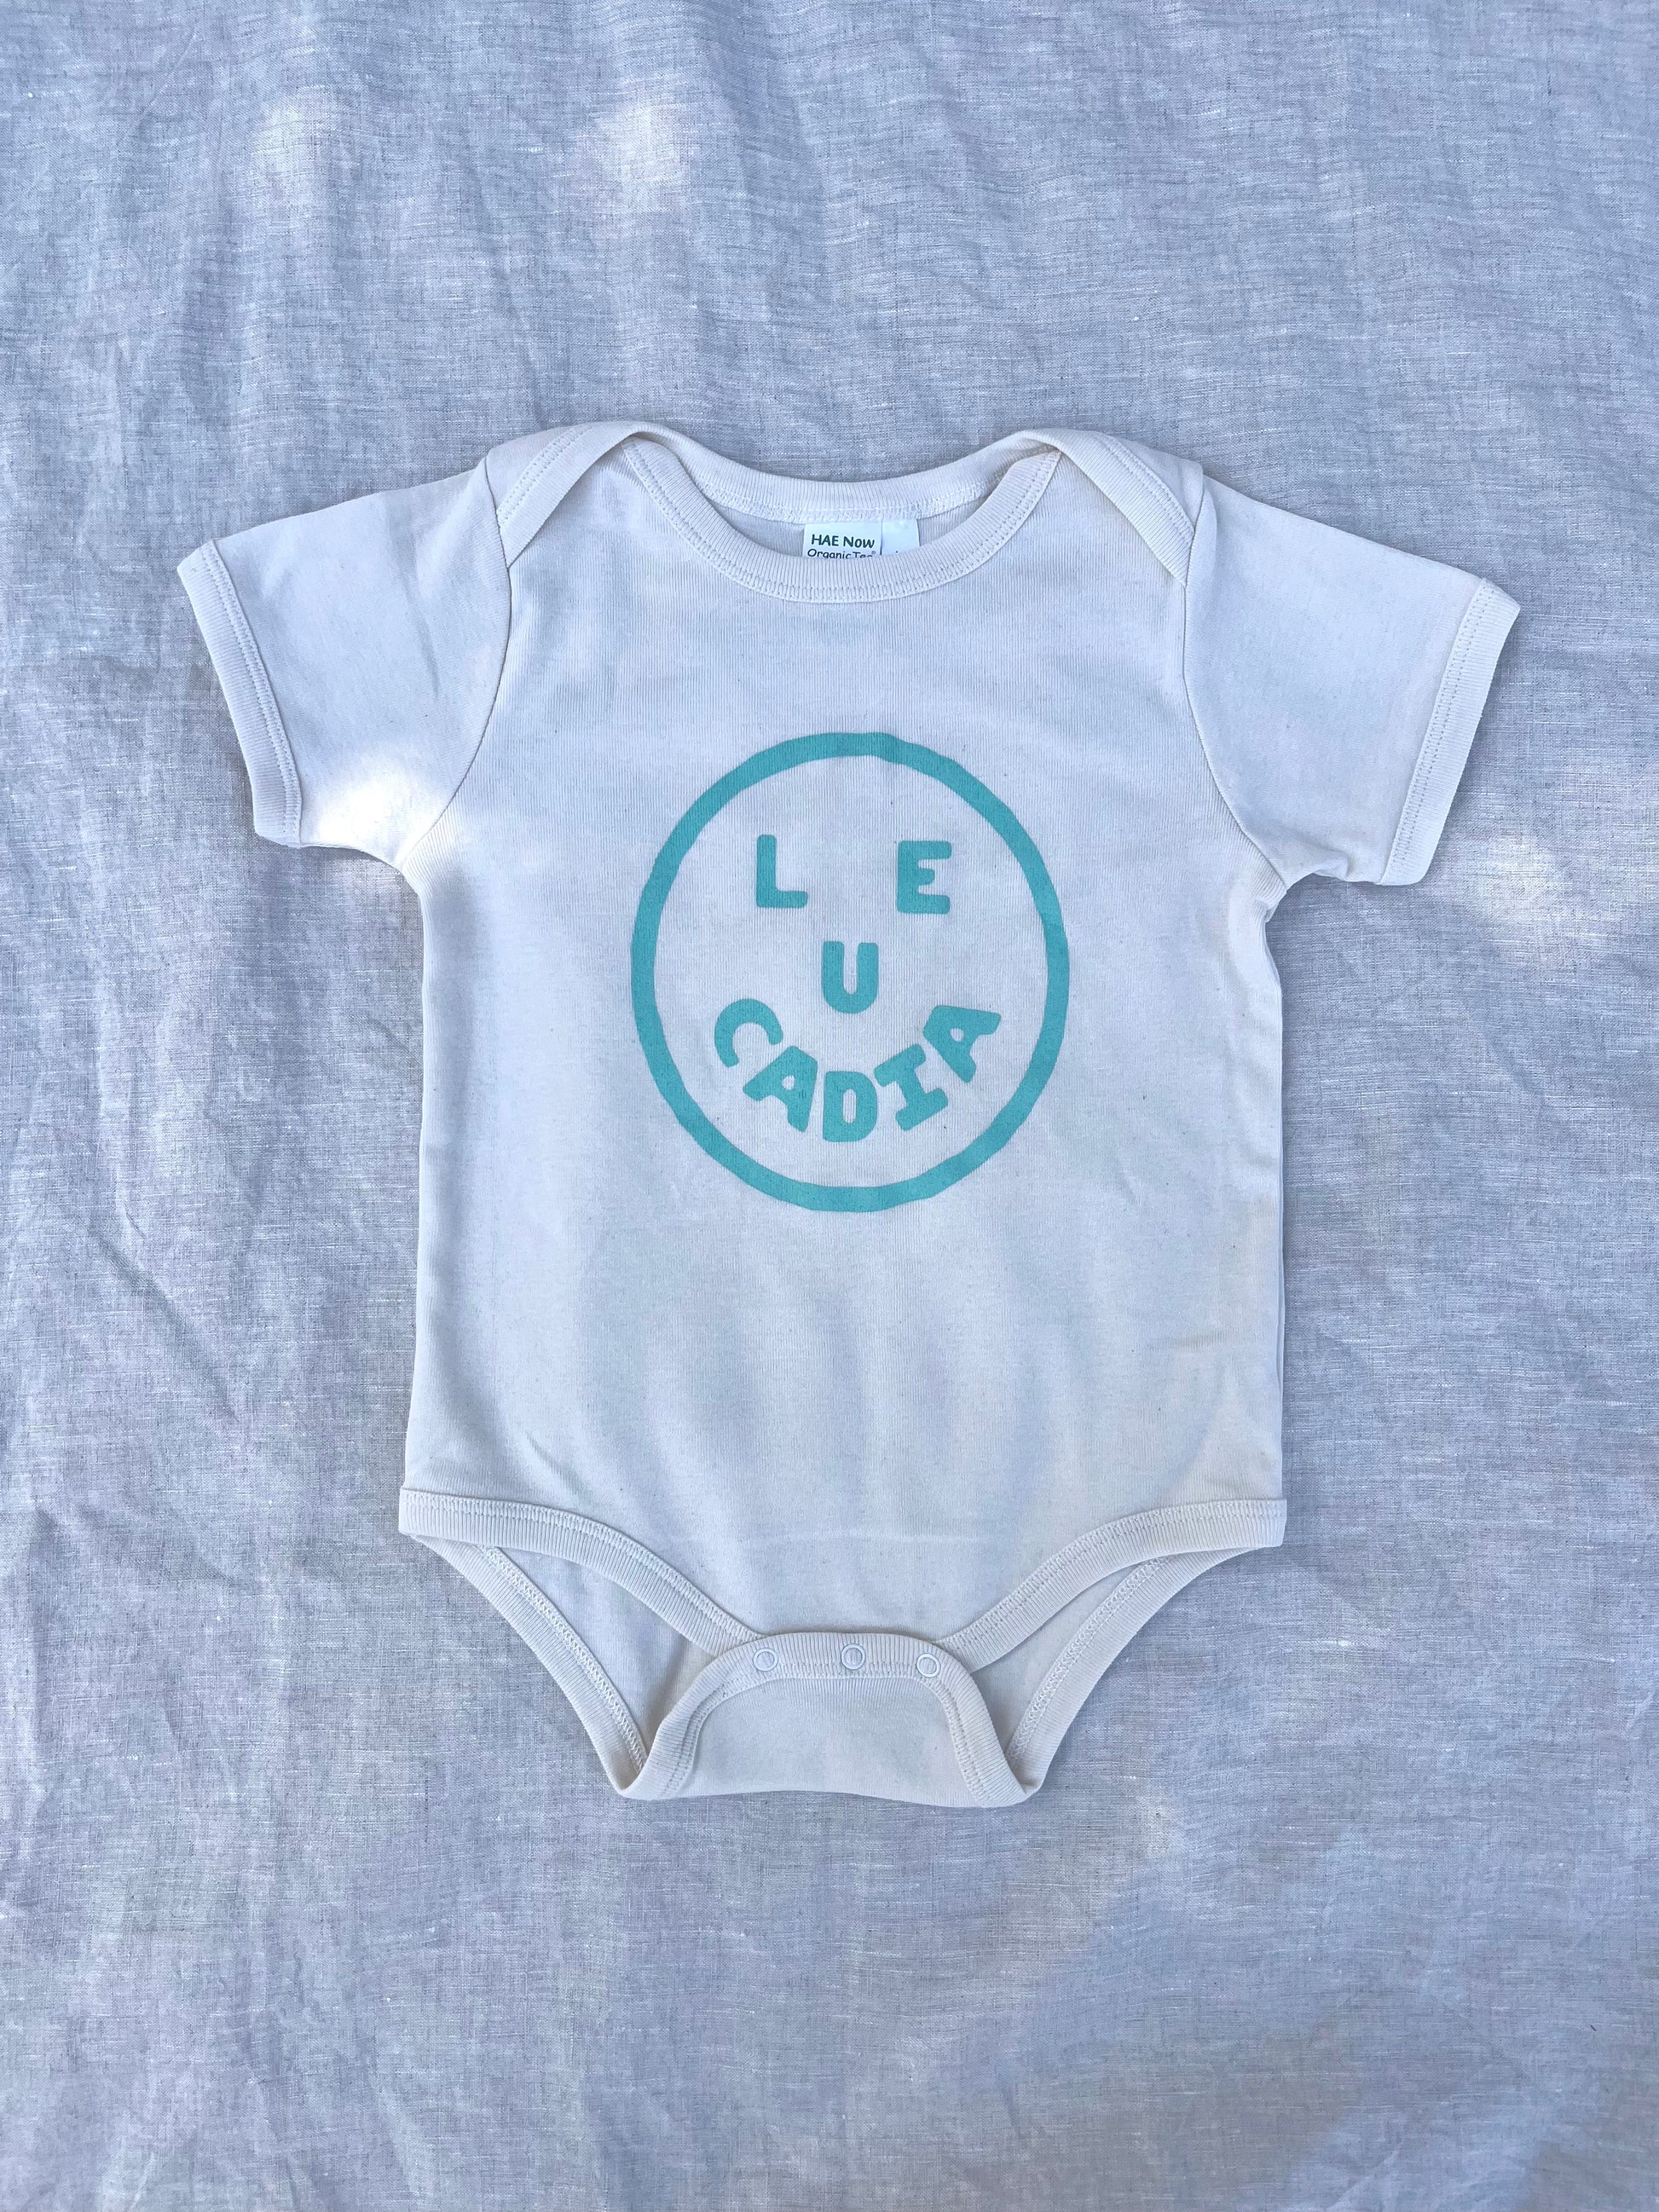 A fun little organic infant onesie with a super cute little Leucadia smiley face by local artist Zach Smith. Printed on an organic cotton, fair trade onesie with all proceeds to San Diego area families facing housing insecurity. Keep it funky, keep it kind, keep it local.